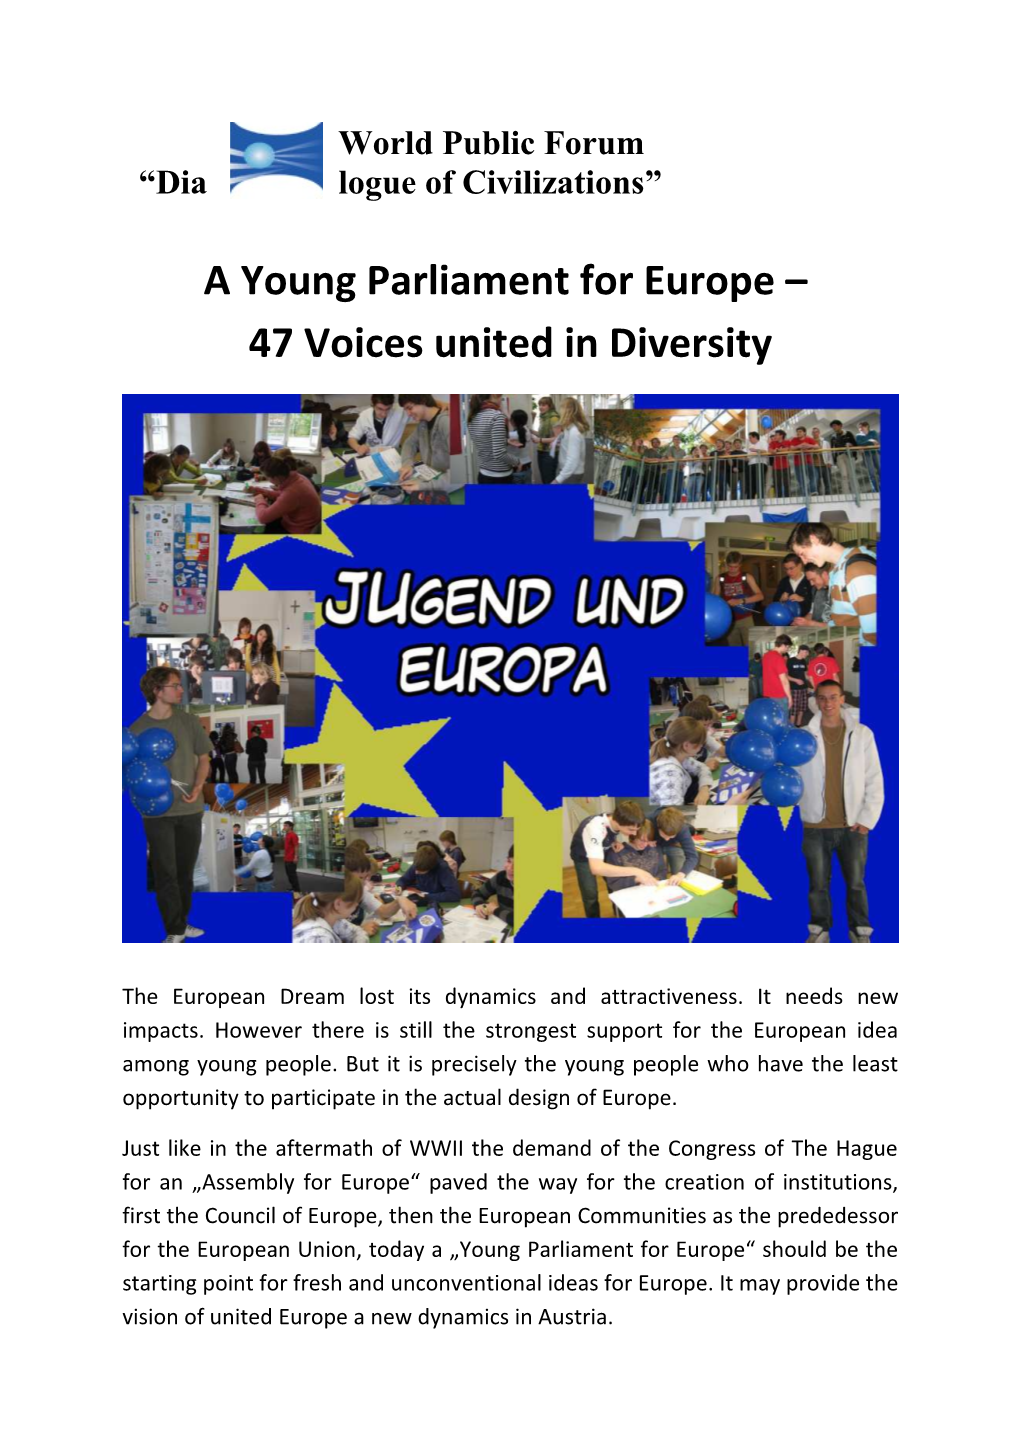 A Young Parliament for Europe 47 Voices United in Diversity